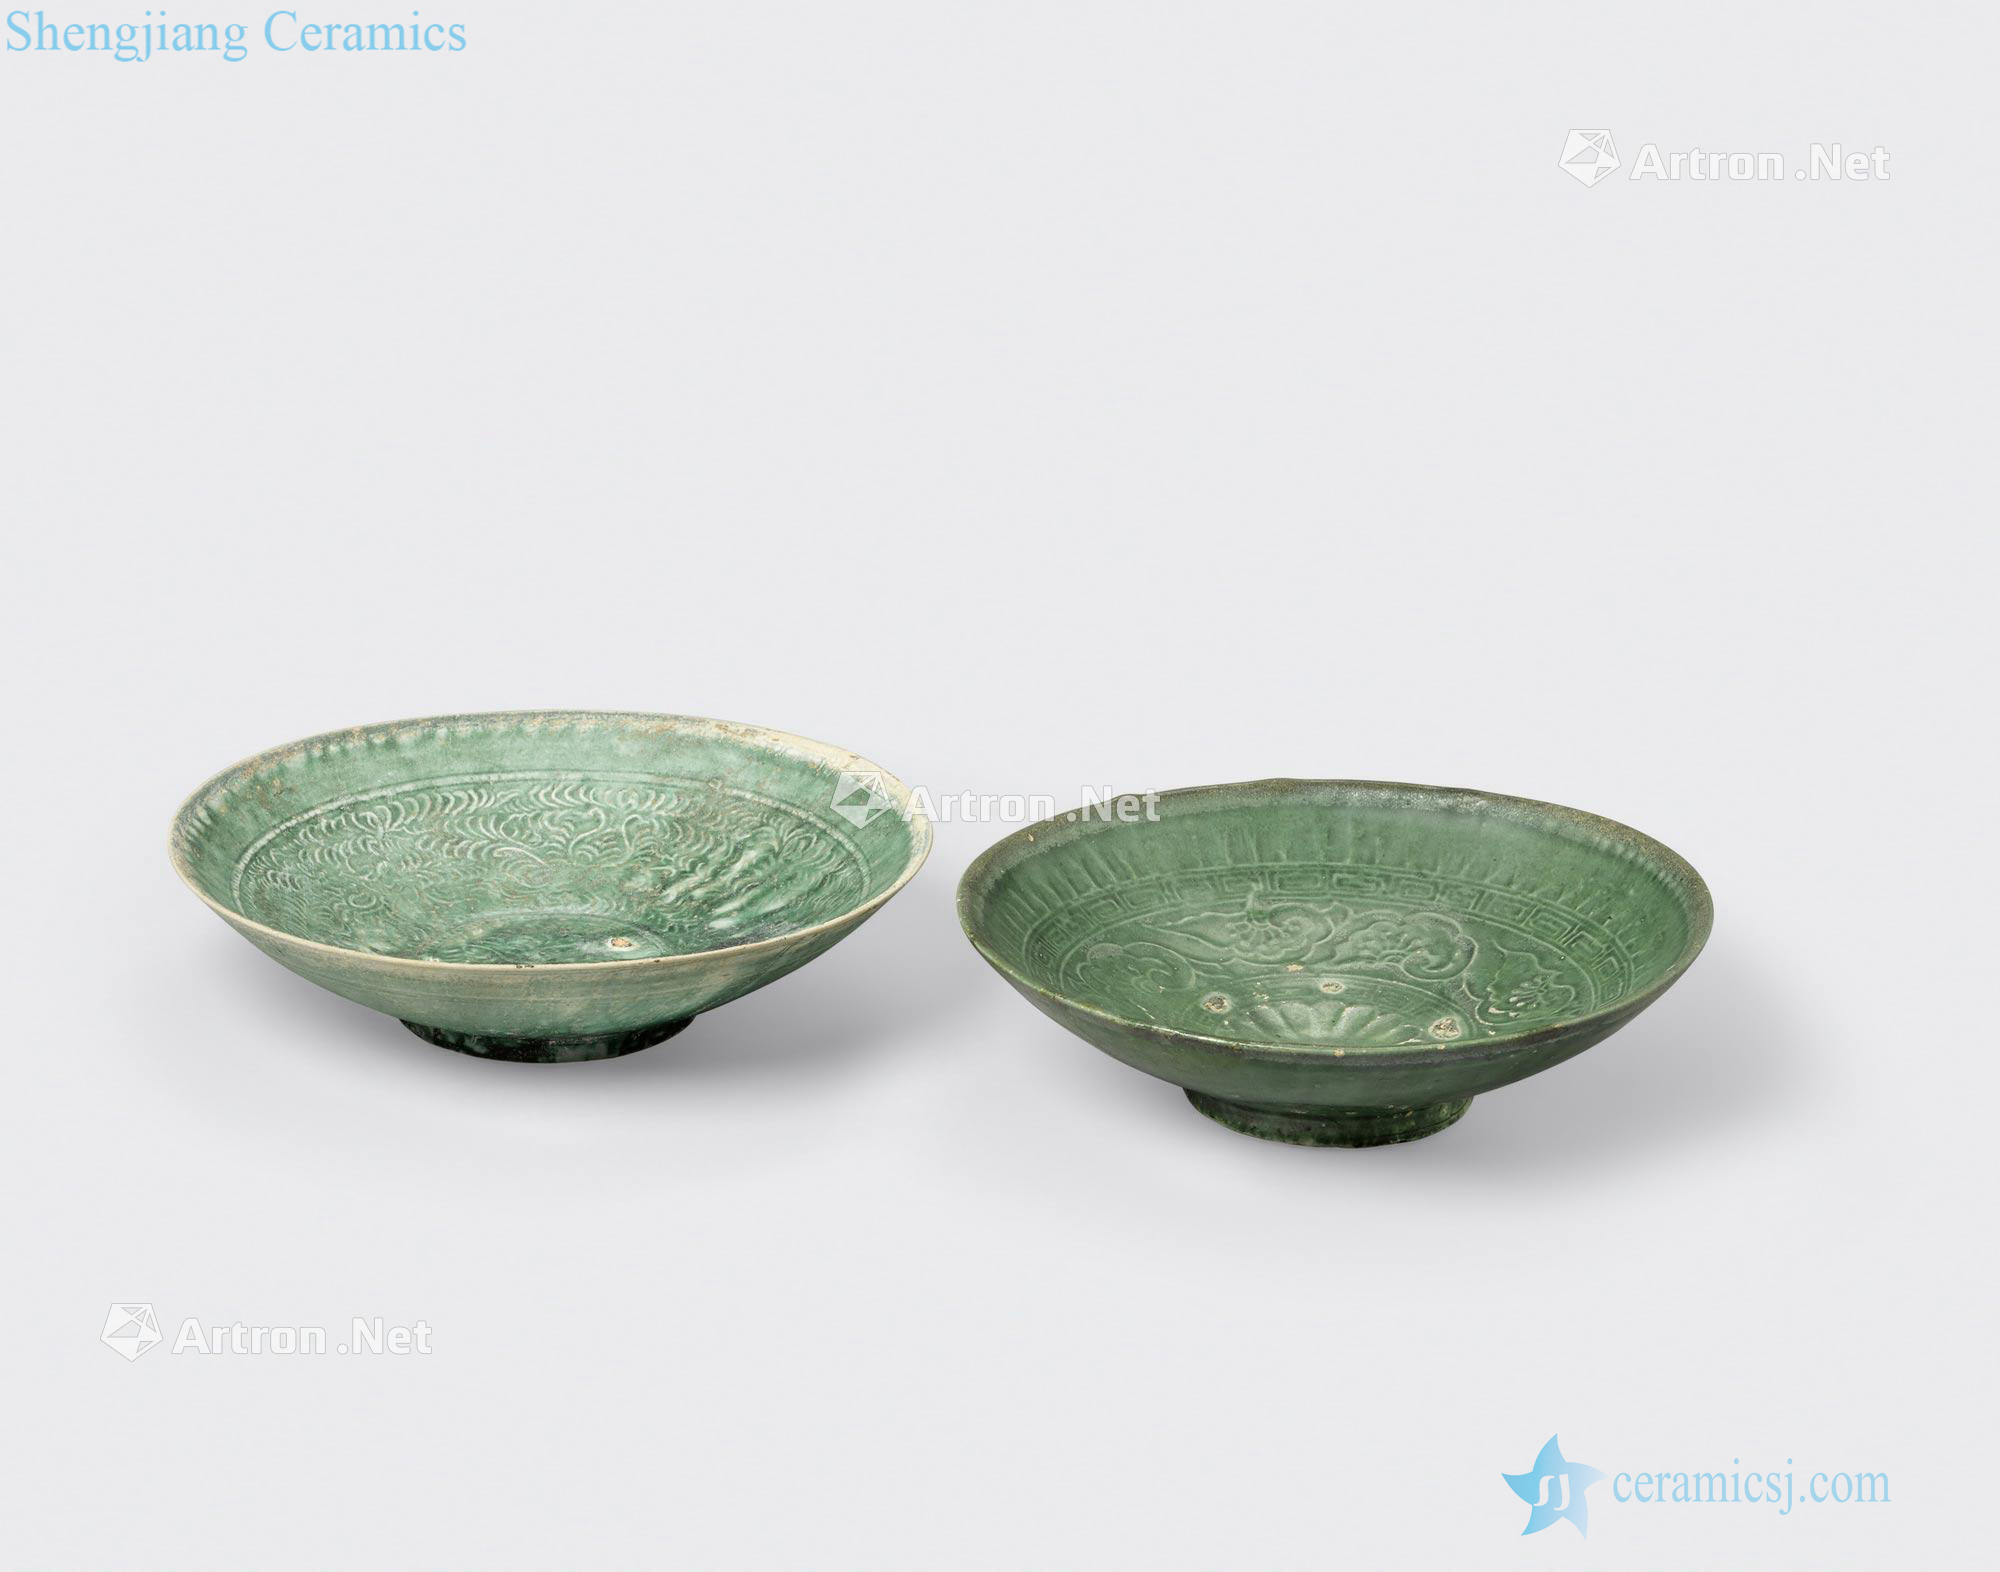 Tran - Le dynasties, 14 th/15 th century TWO GREEN GLAZED SHALLOW BOWLS WITH IMPRESSED DECORATION AND SPUR MARKS